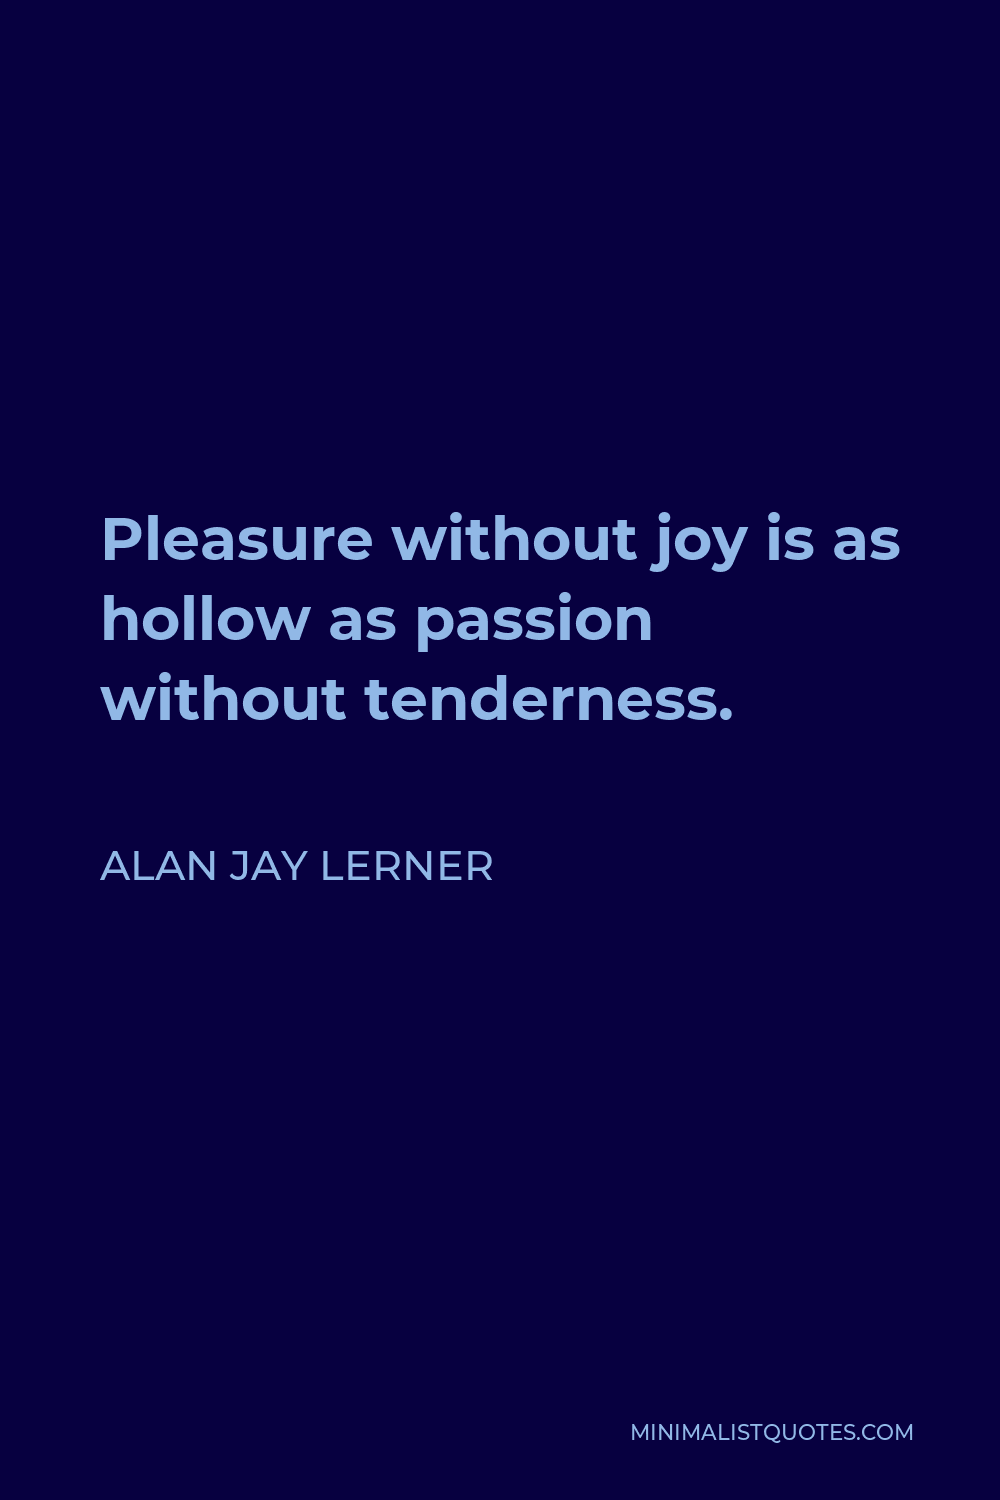 Alan Jay Lerner Quote - Pleasure without joy is as hollow as passion without tenderness.